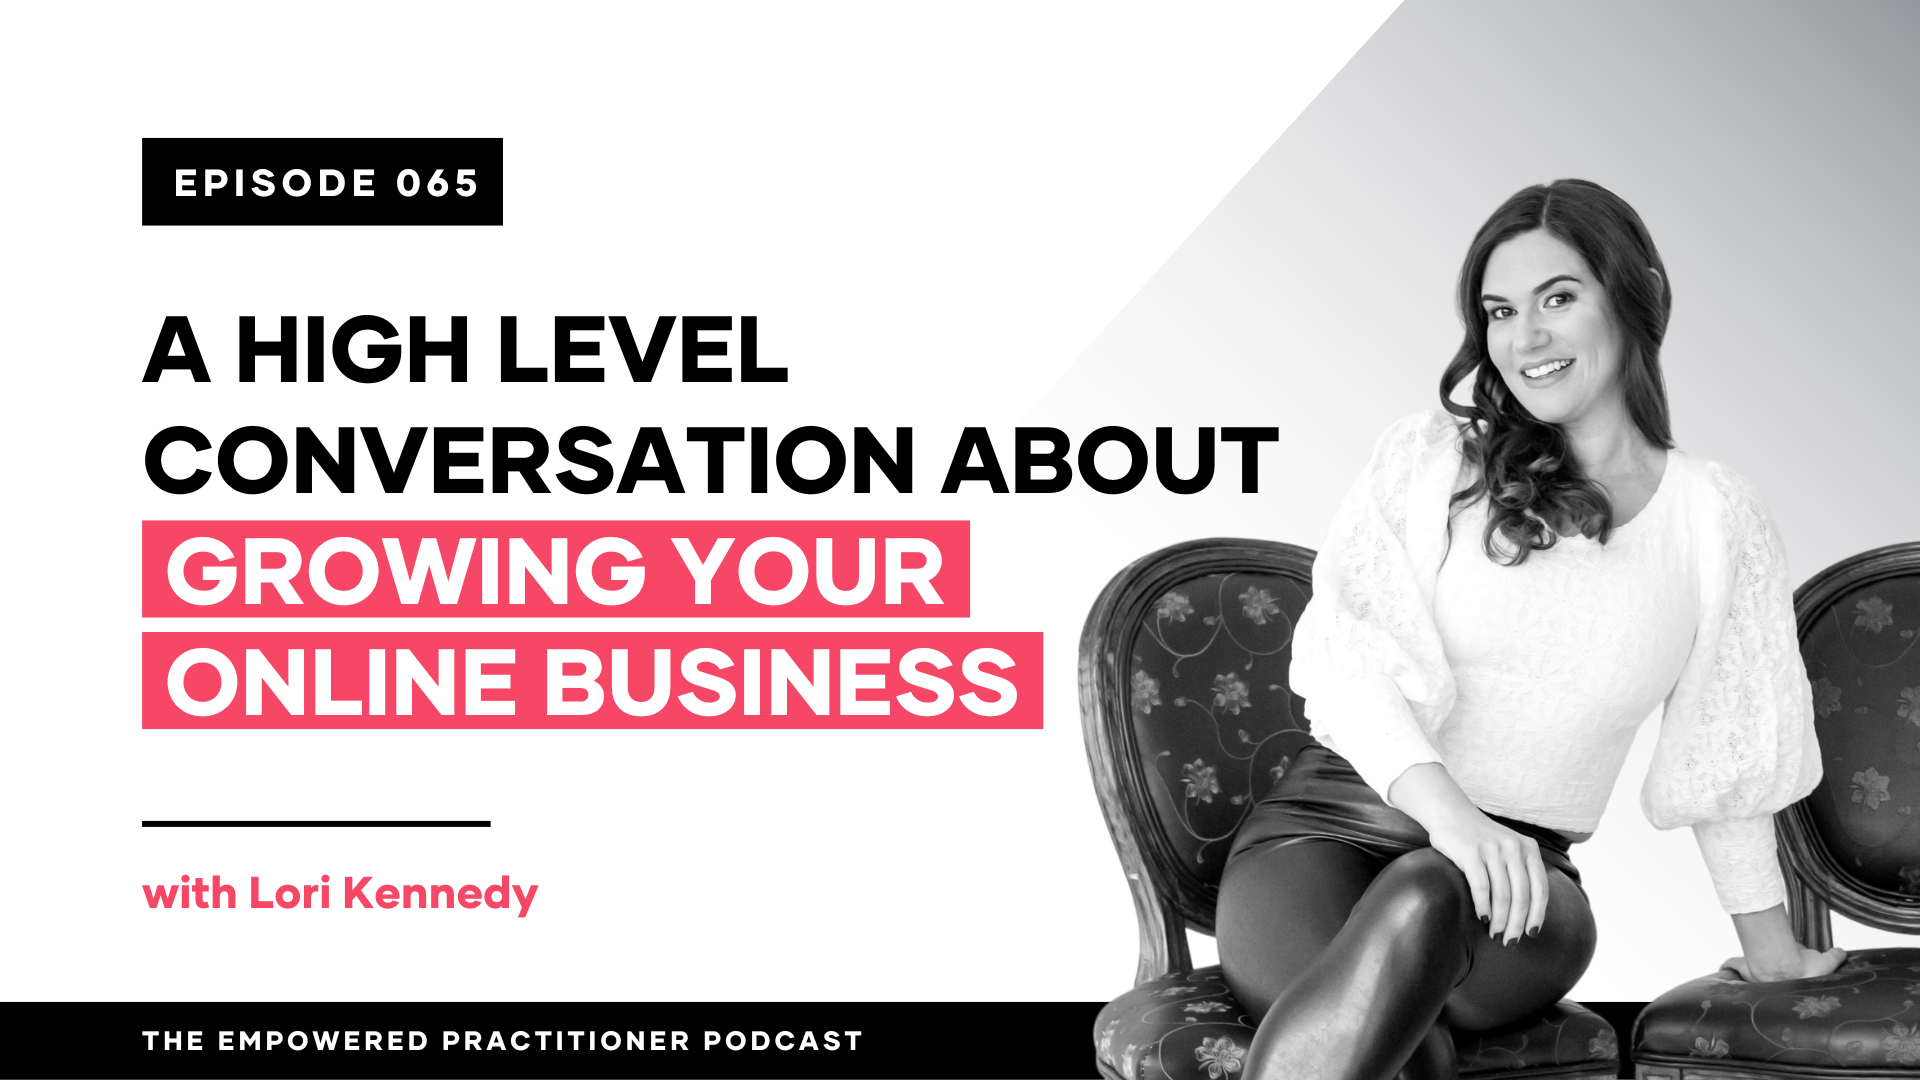 A High Level Conversation About Growing Your Online Business